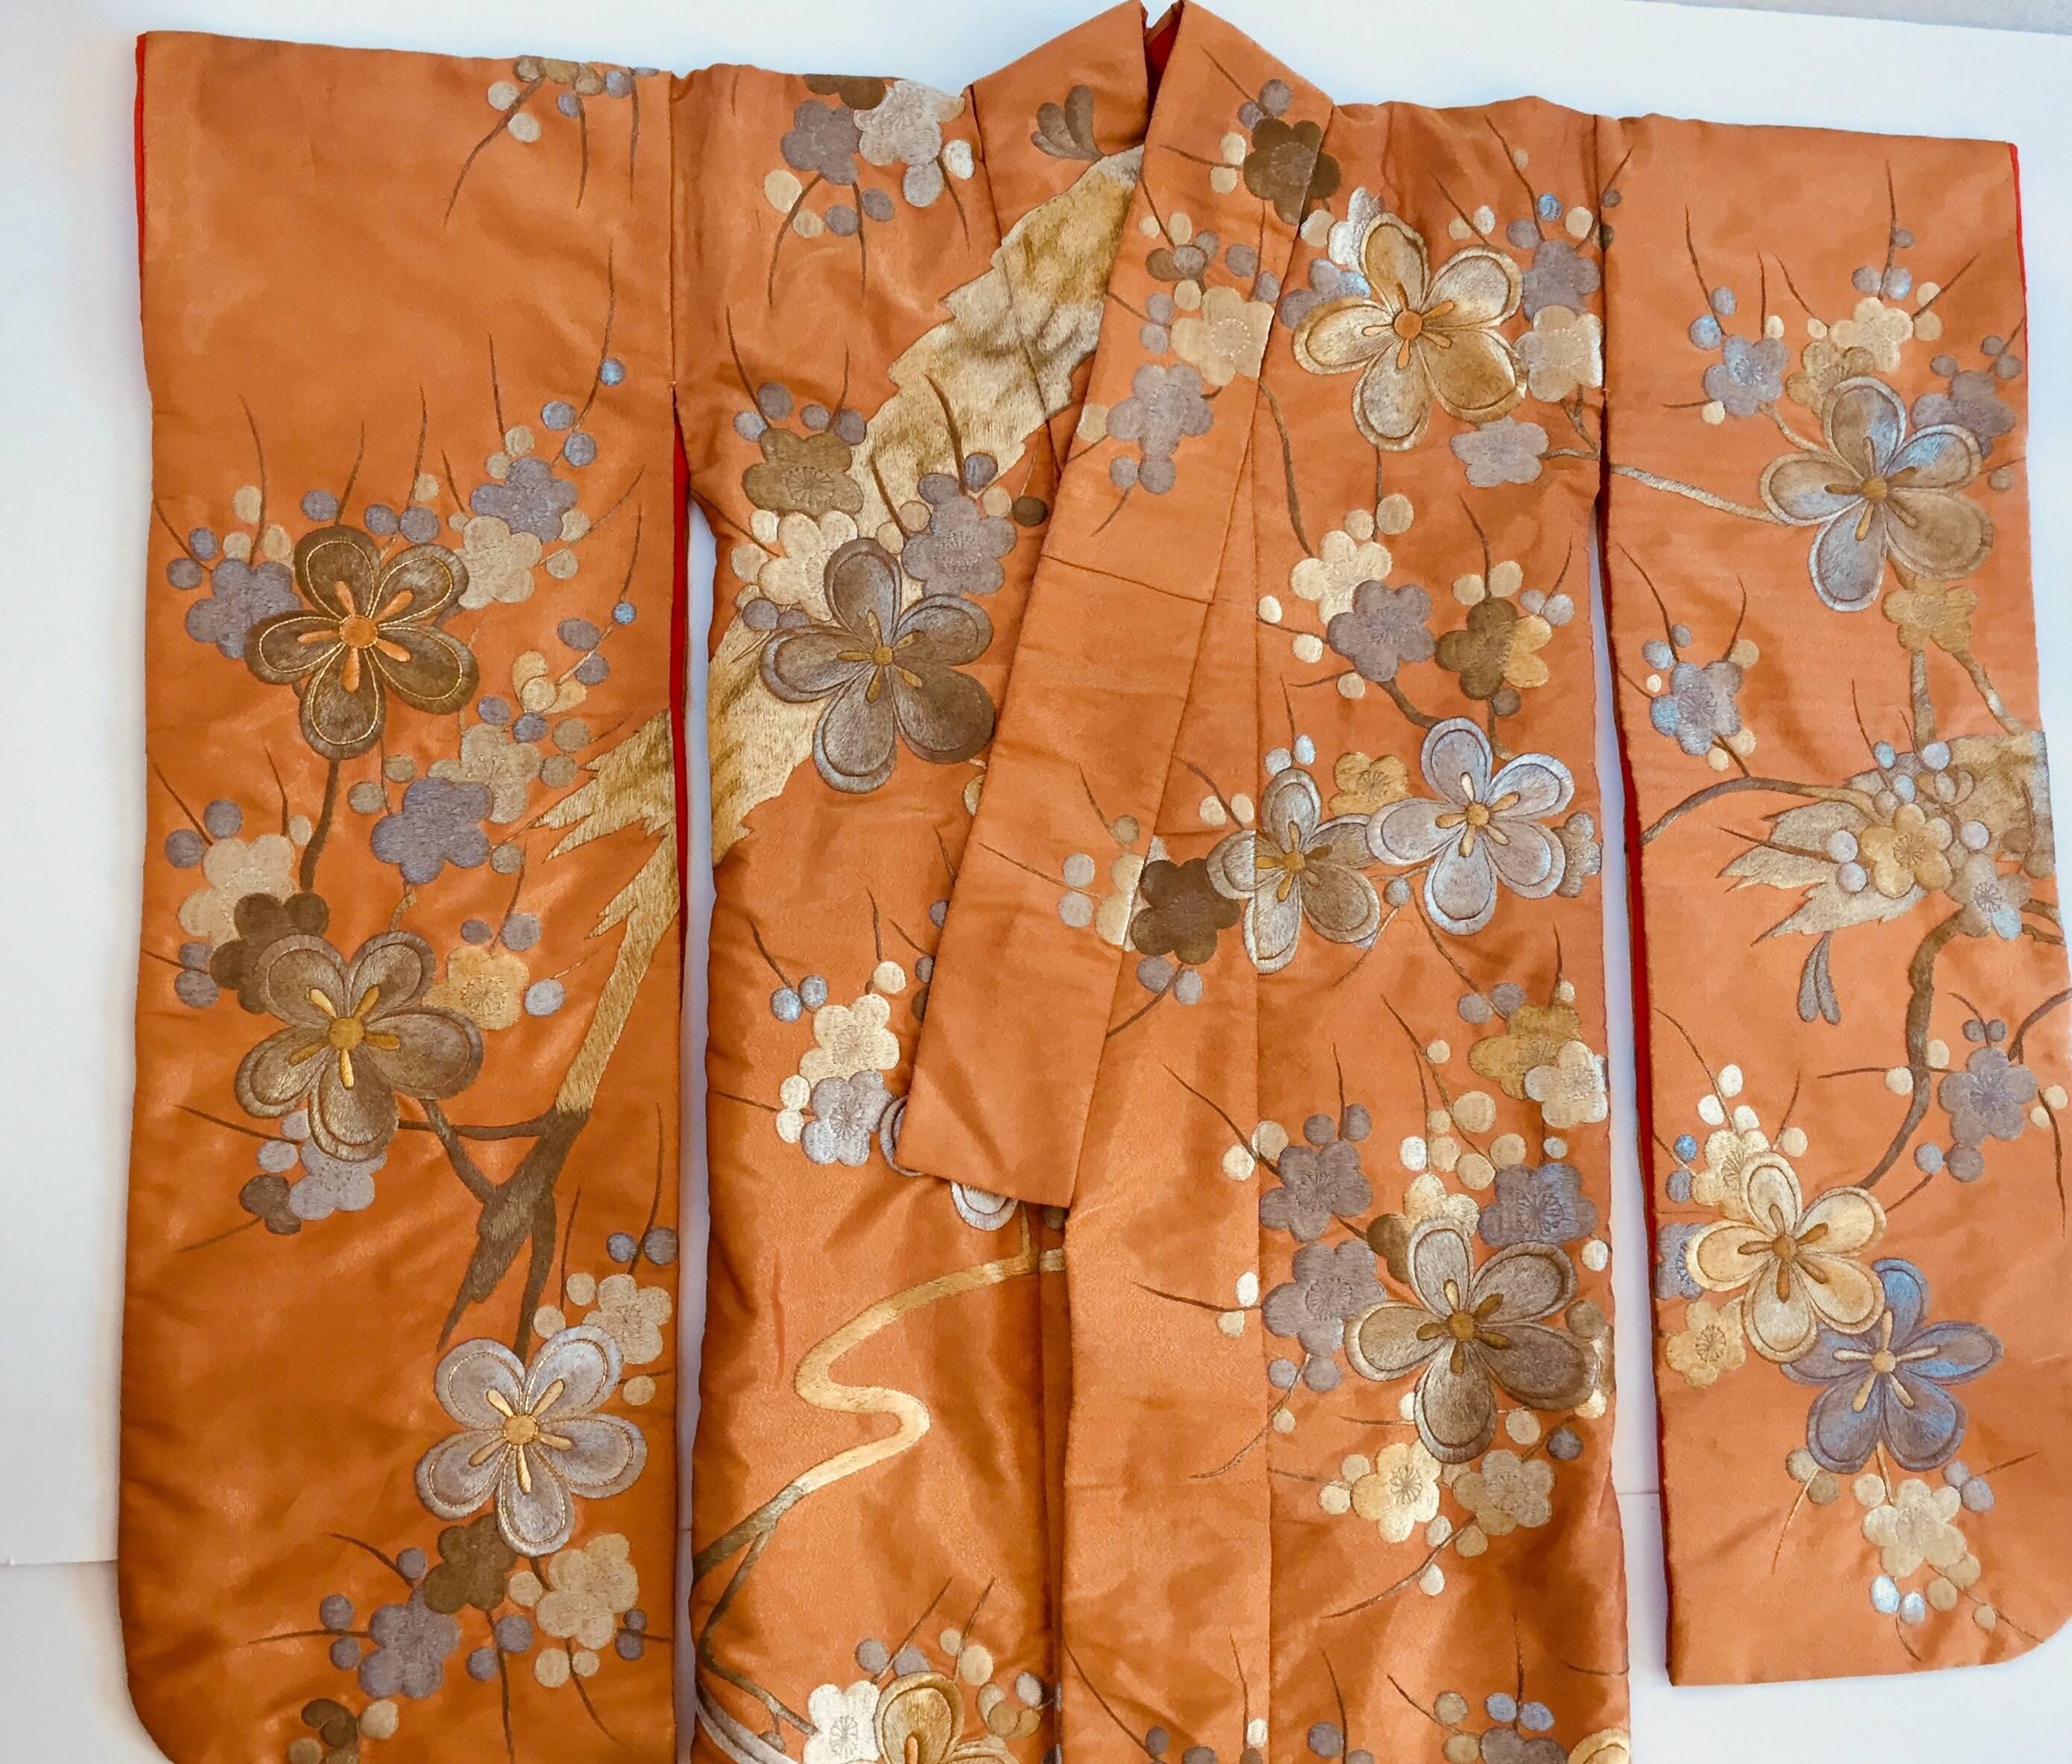 Hand-Crafted Vintage Brocade Japanese Ceremonial Kimono in Orange, Gold and Silver